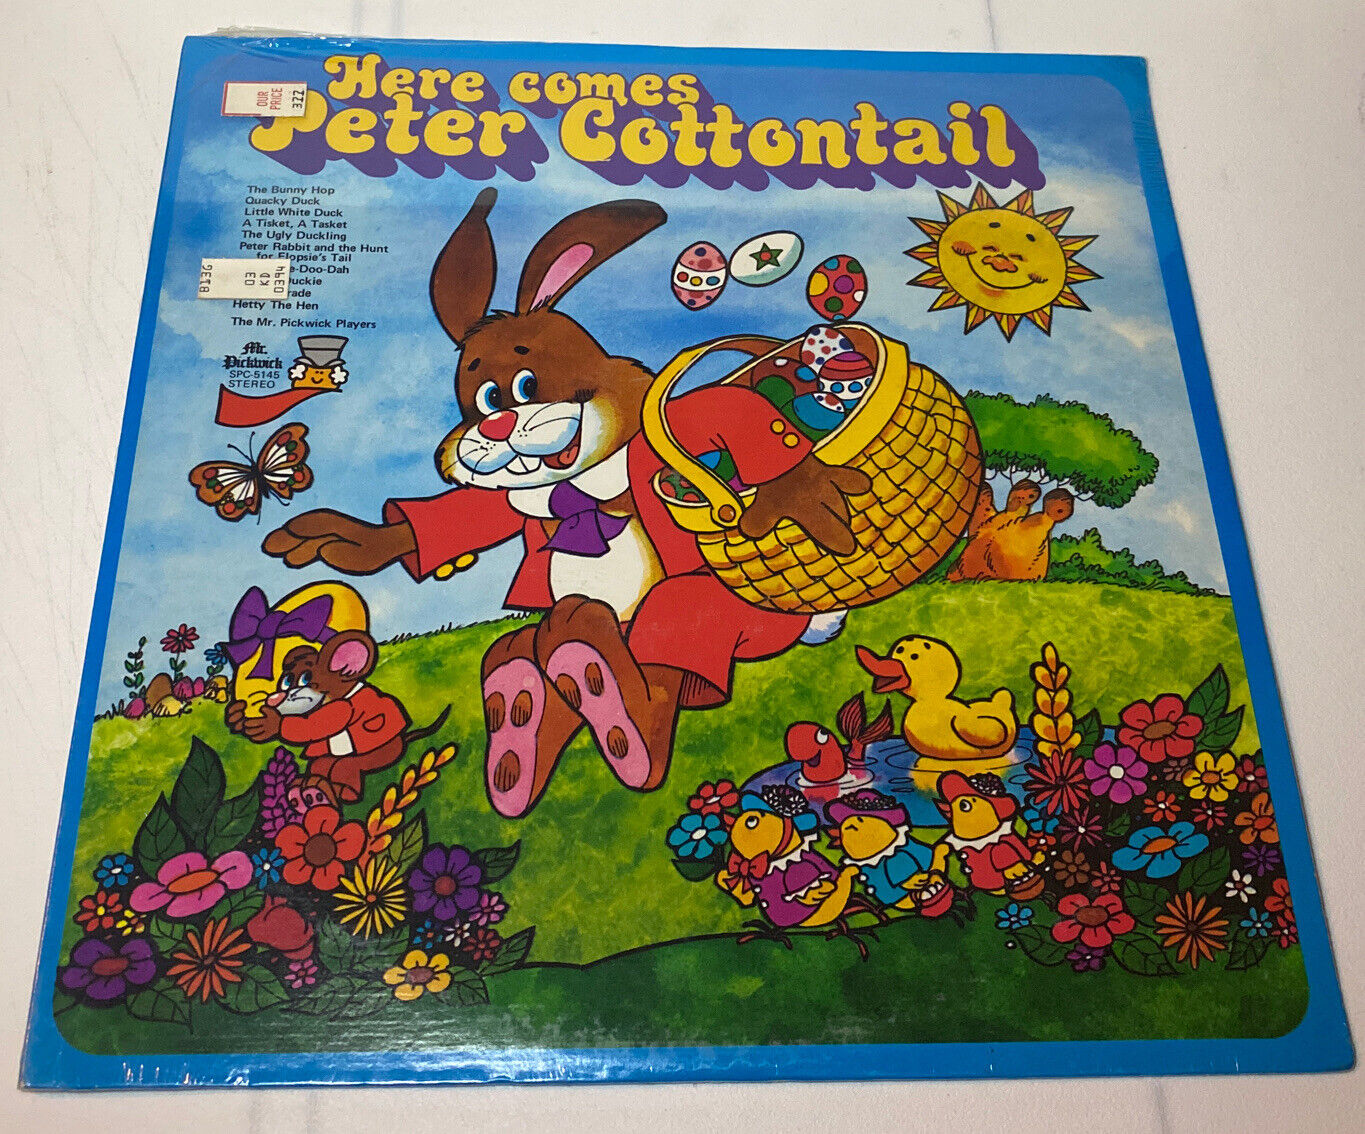 1975 FACTORY SEALED - Here Comes Peter Cottontail, Vinyl LP Record, Easter Bunny